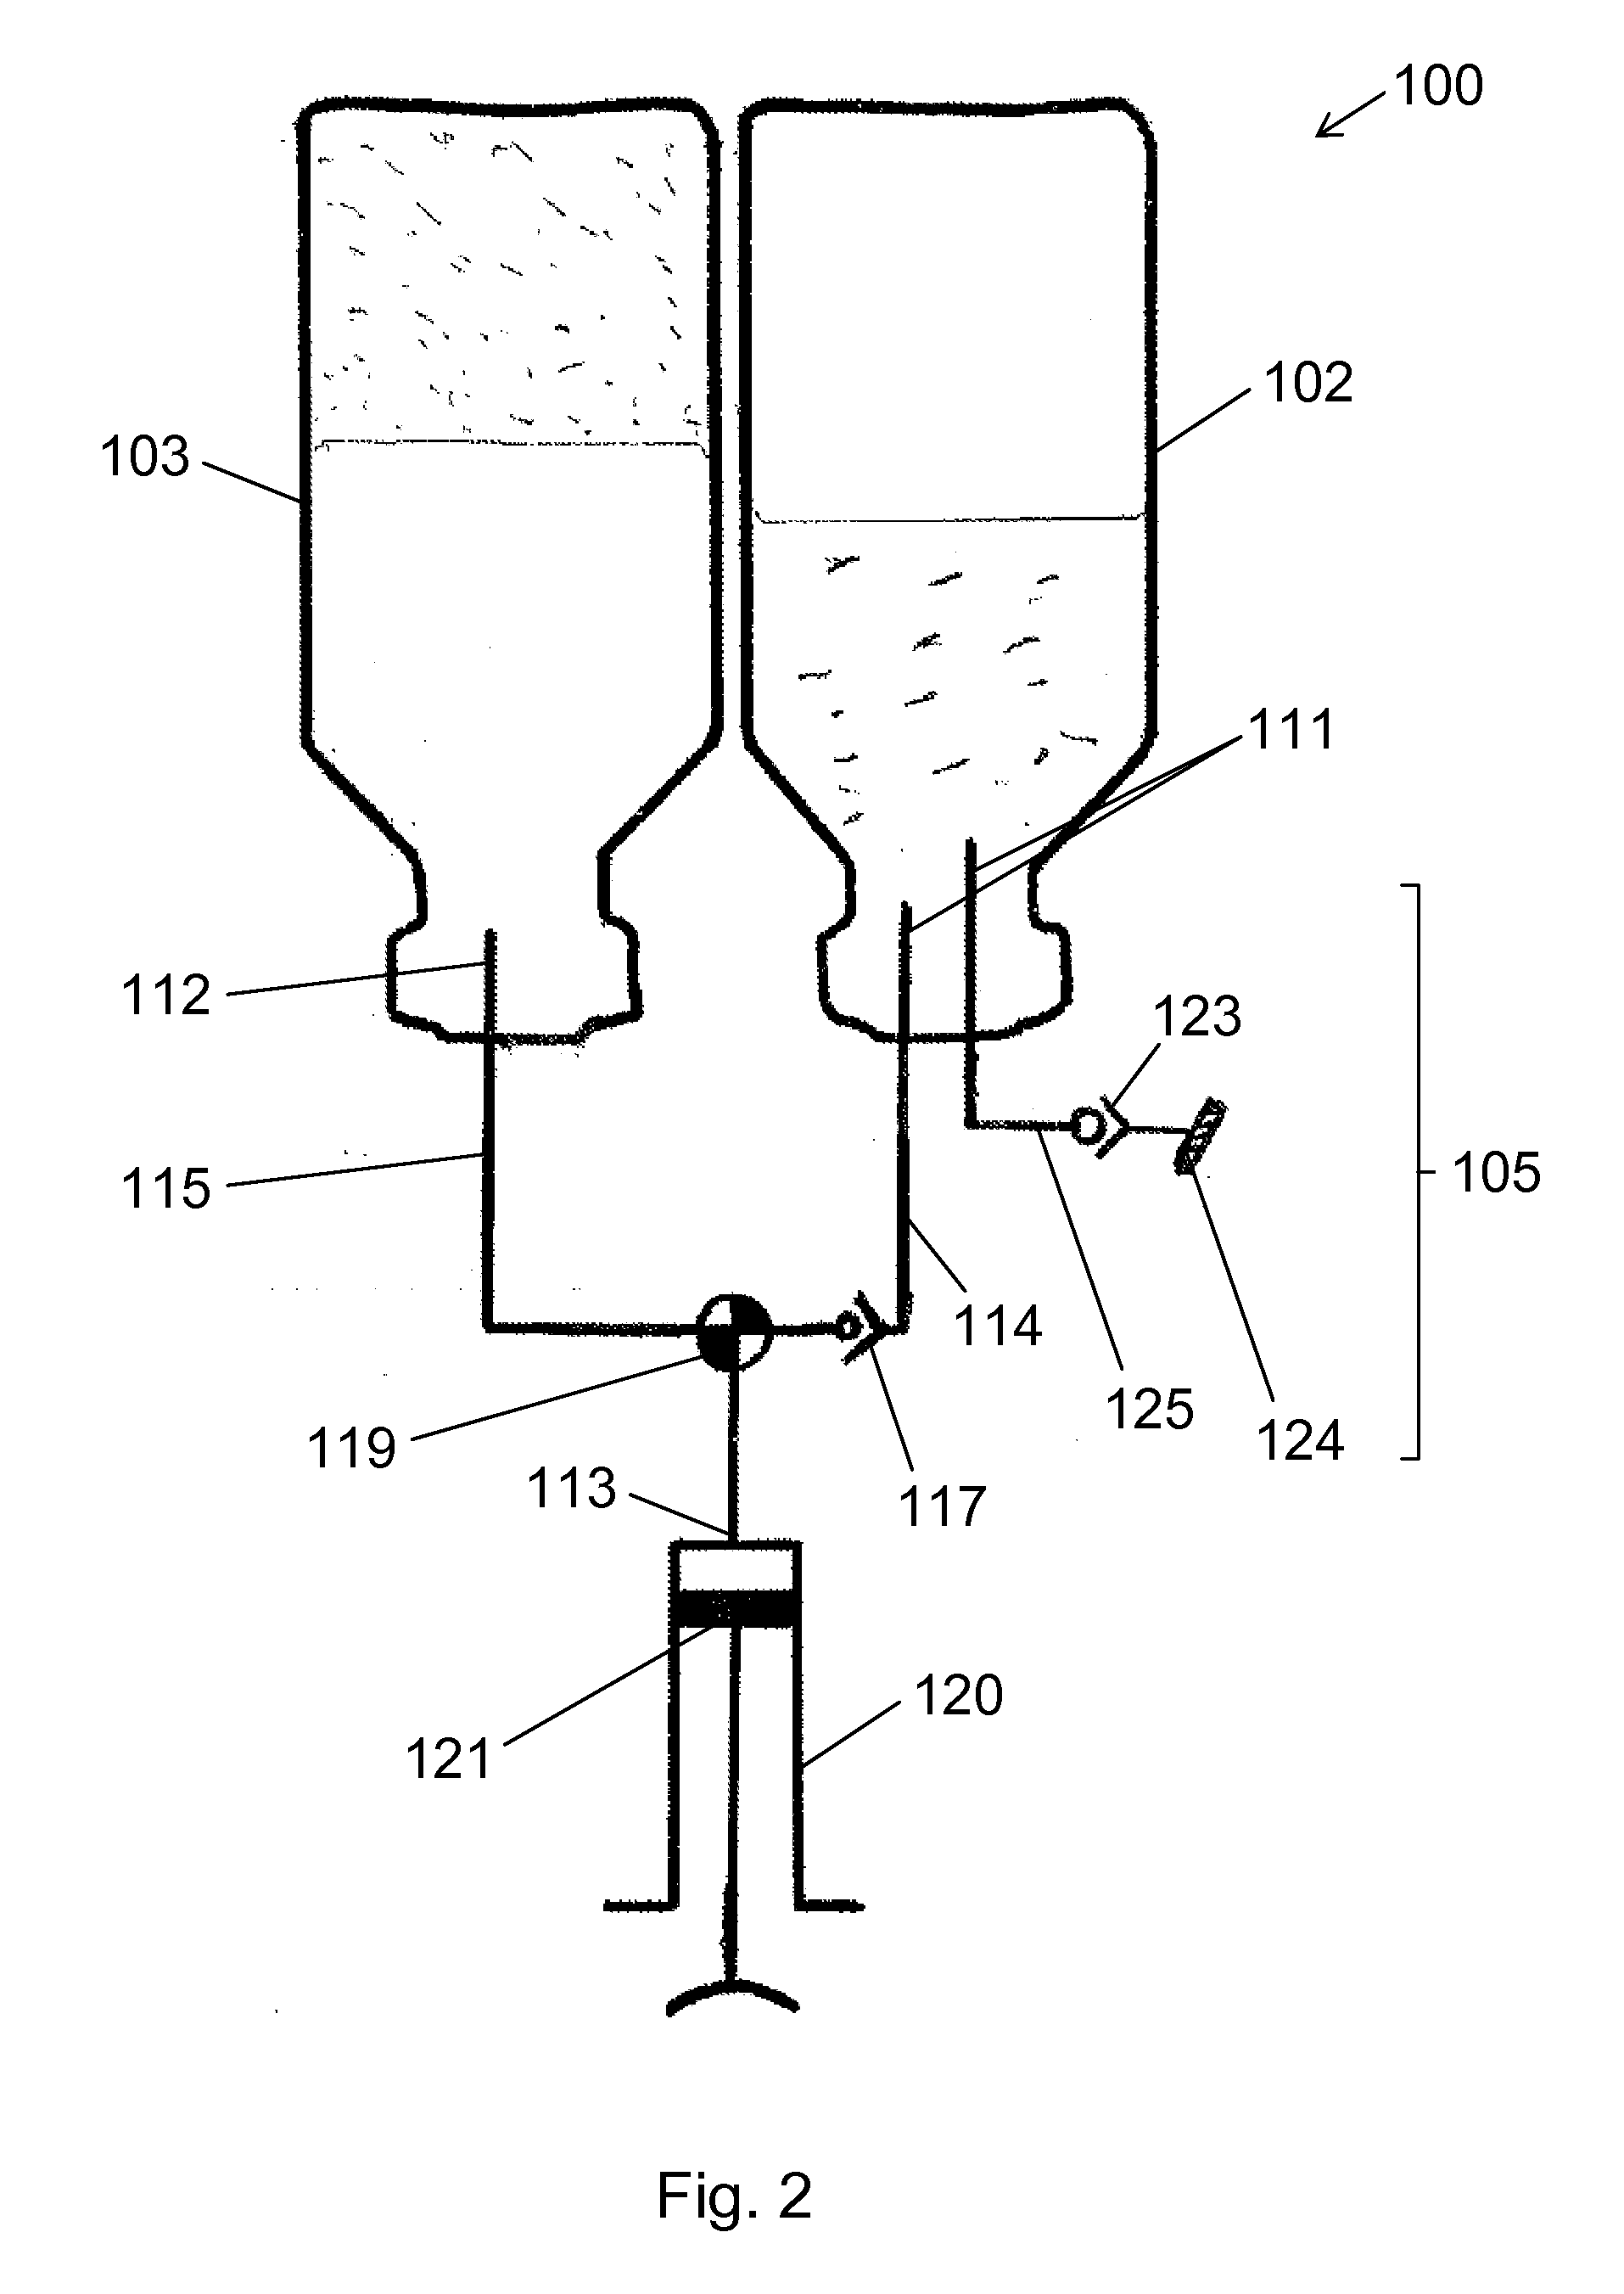 System for reconstitution of a powdered drug